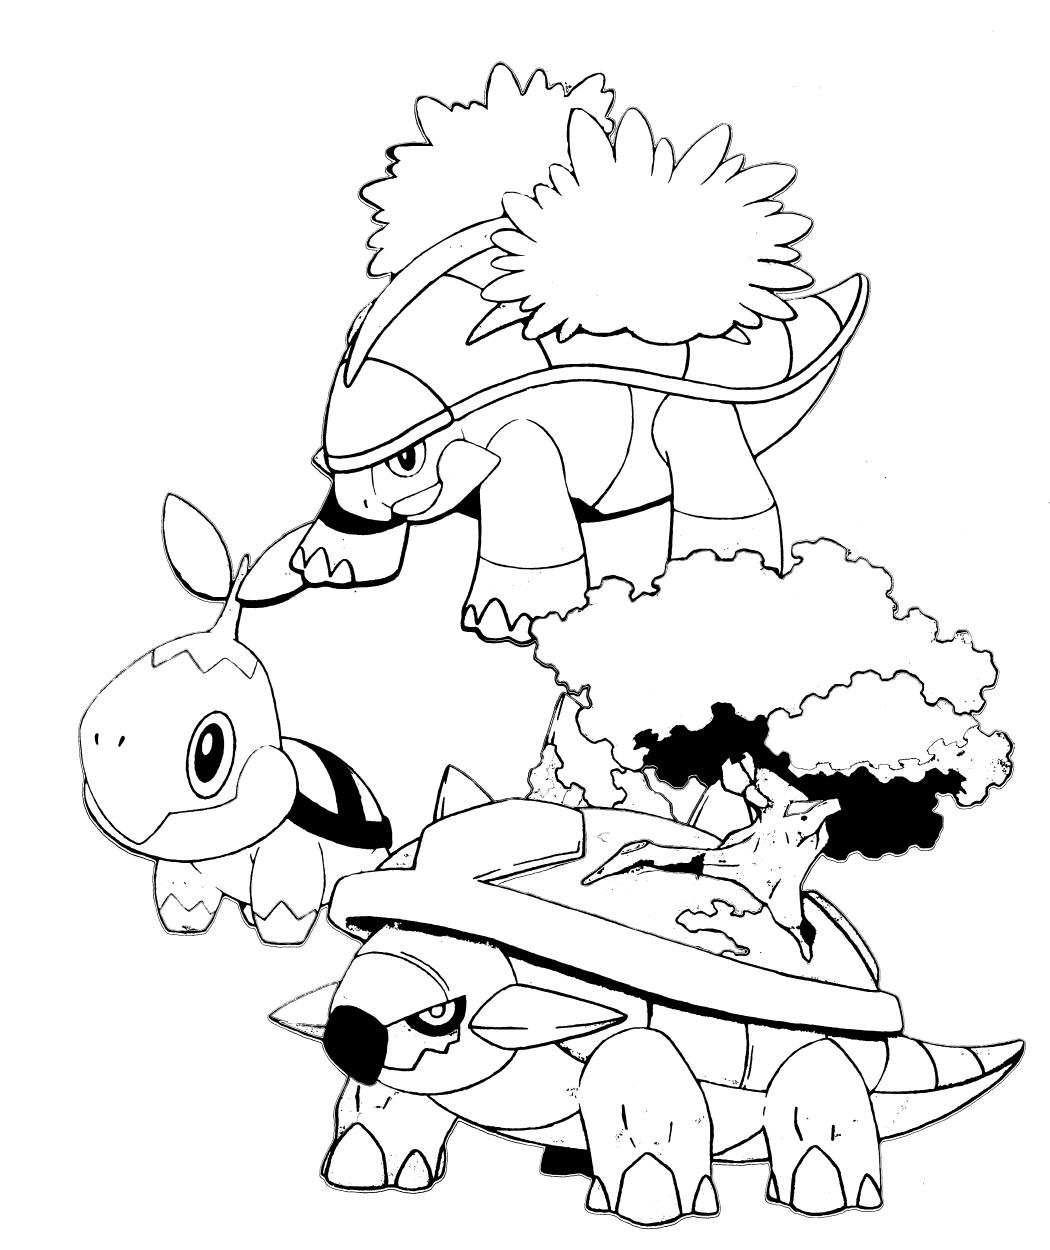  Turtle Pokemon Coloring Pages | Coloring pages for kids | Kids coloring pages |